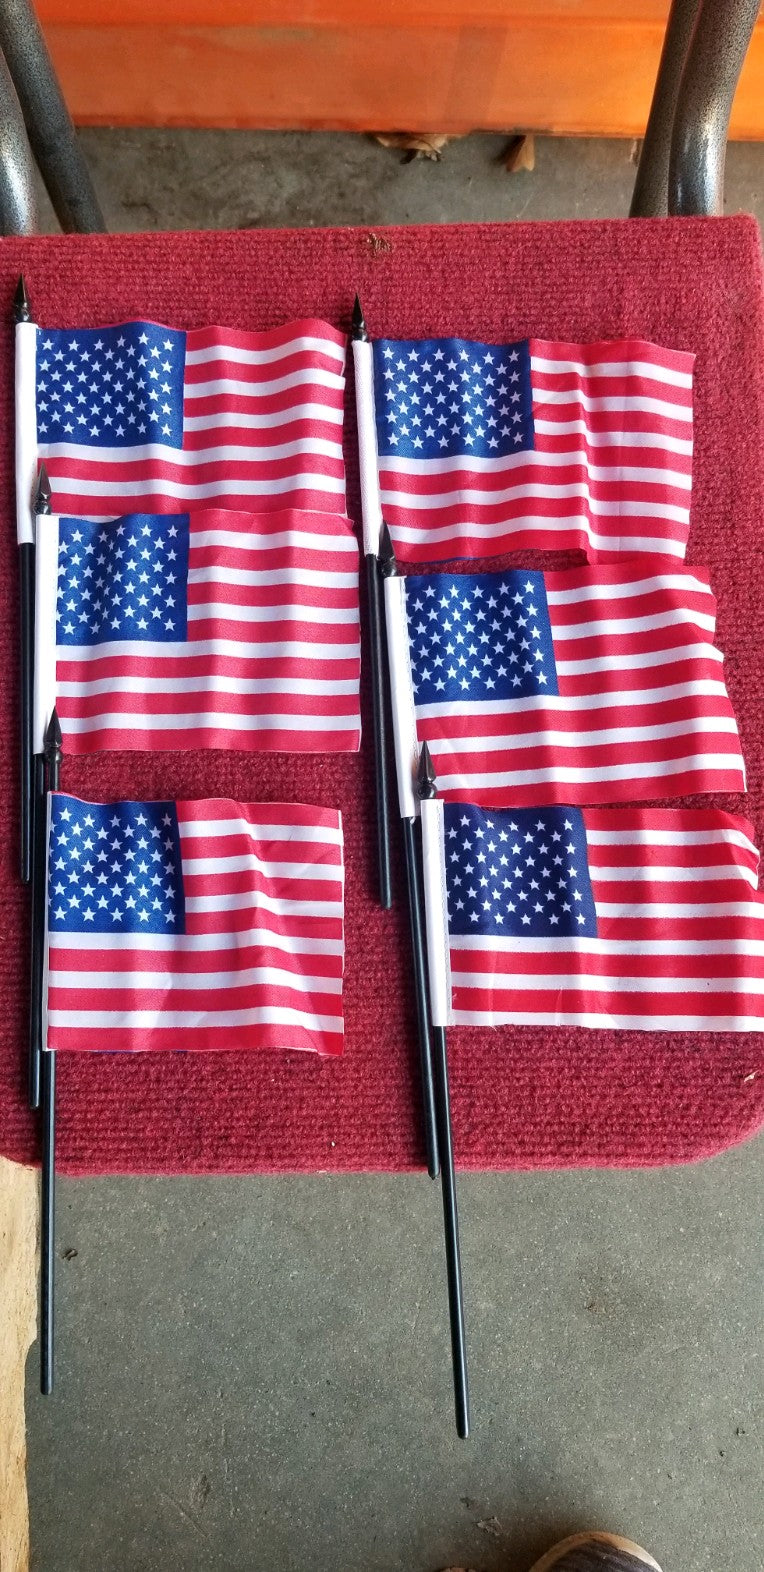 144 USA 4x6 inches Stick Flags Dura-Lite ™ Poly Printed American Flags